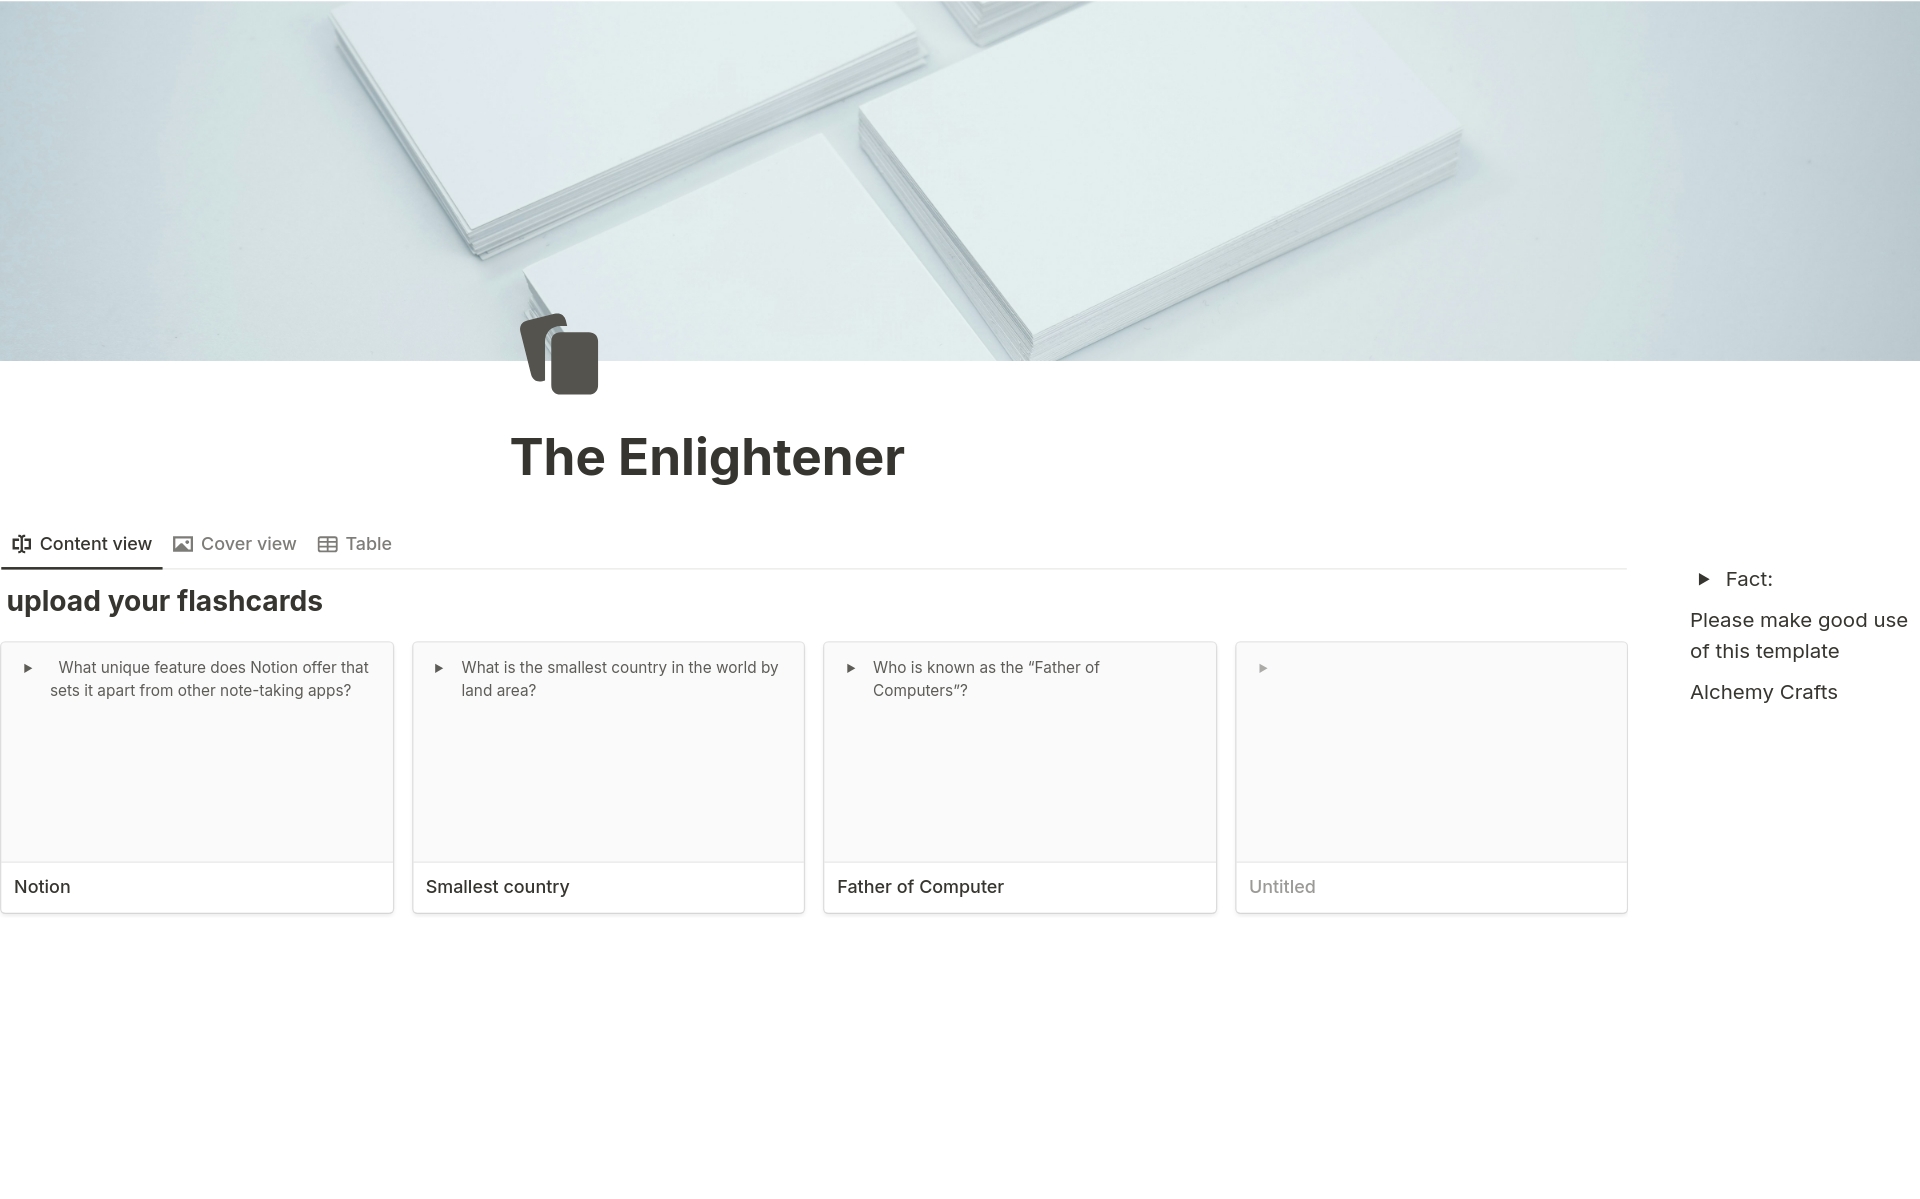 Unveil the power of knowledge with “The Enlightener,” a flashcard template designed to illuminate your learning path.